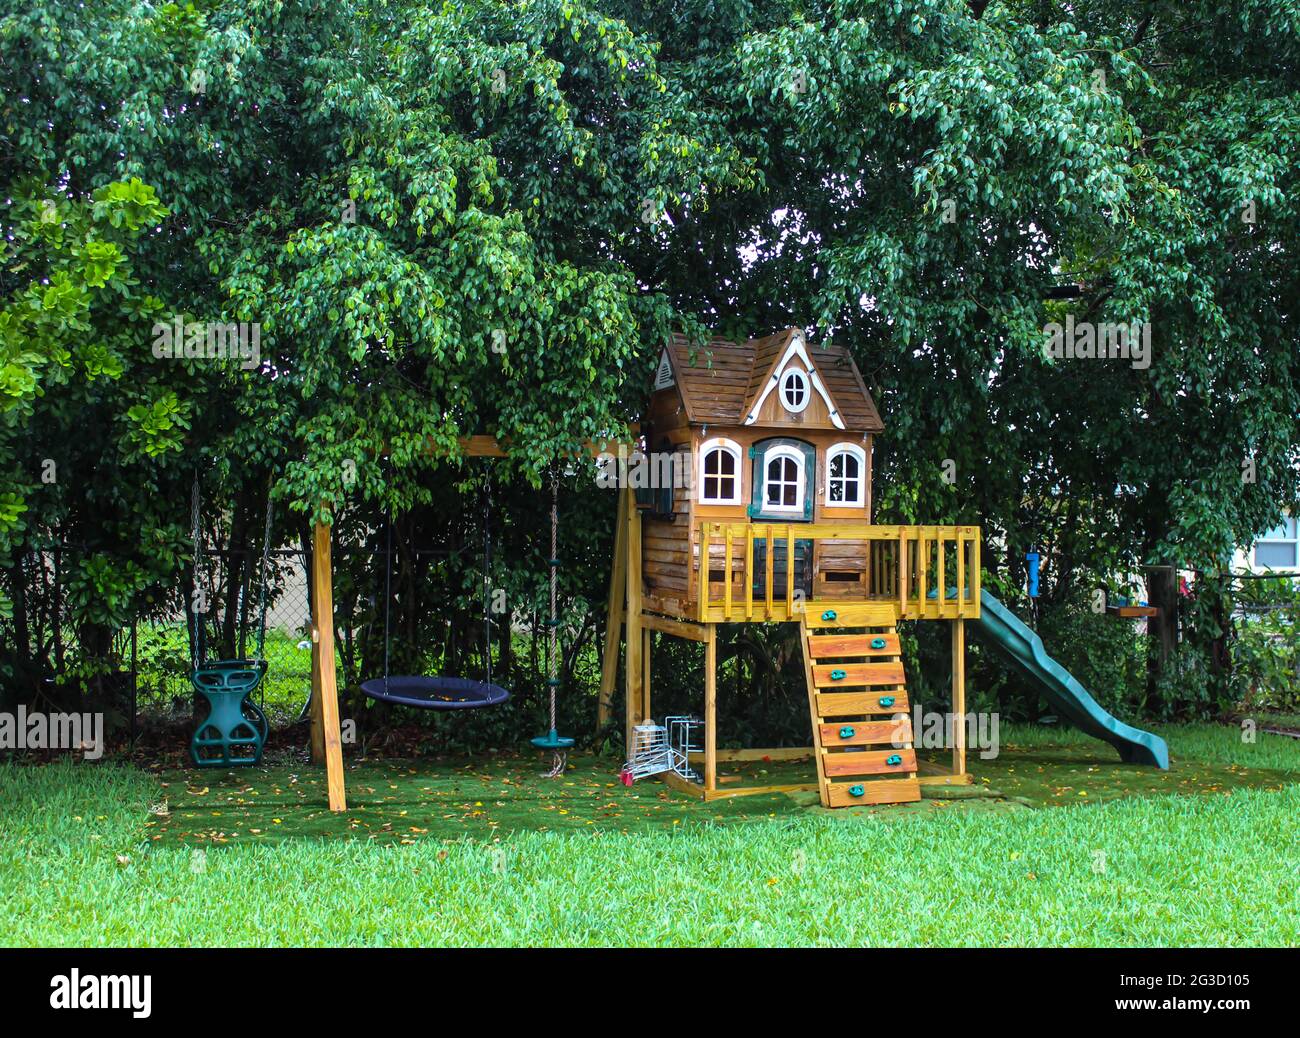 Backyard wooden swing set for kids to play. Summer time activity Stock Photo